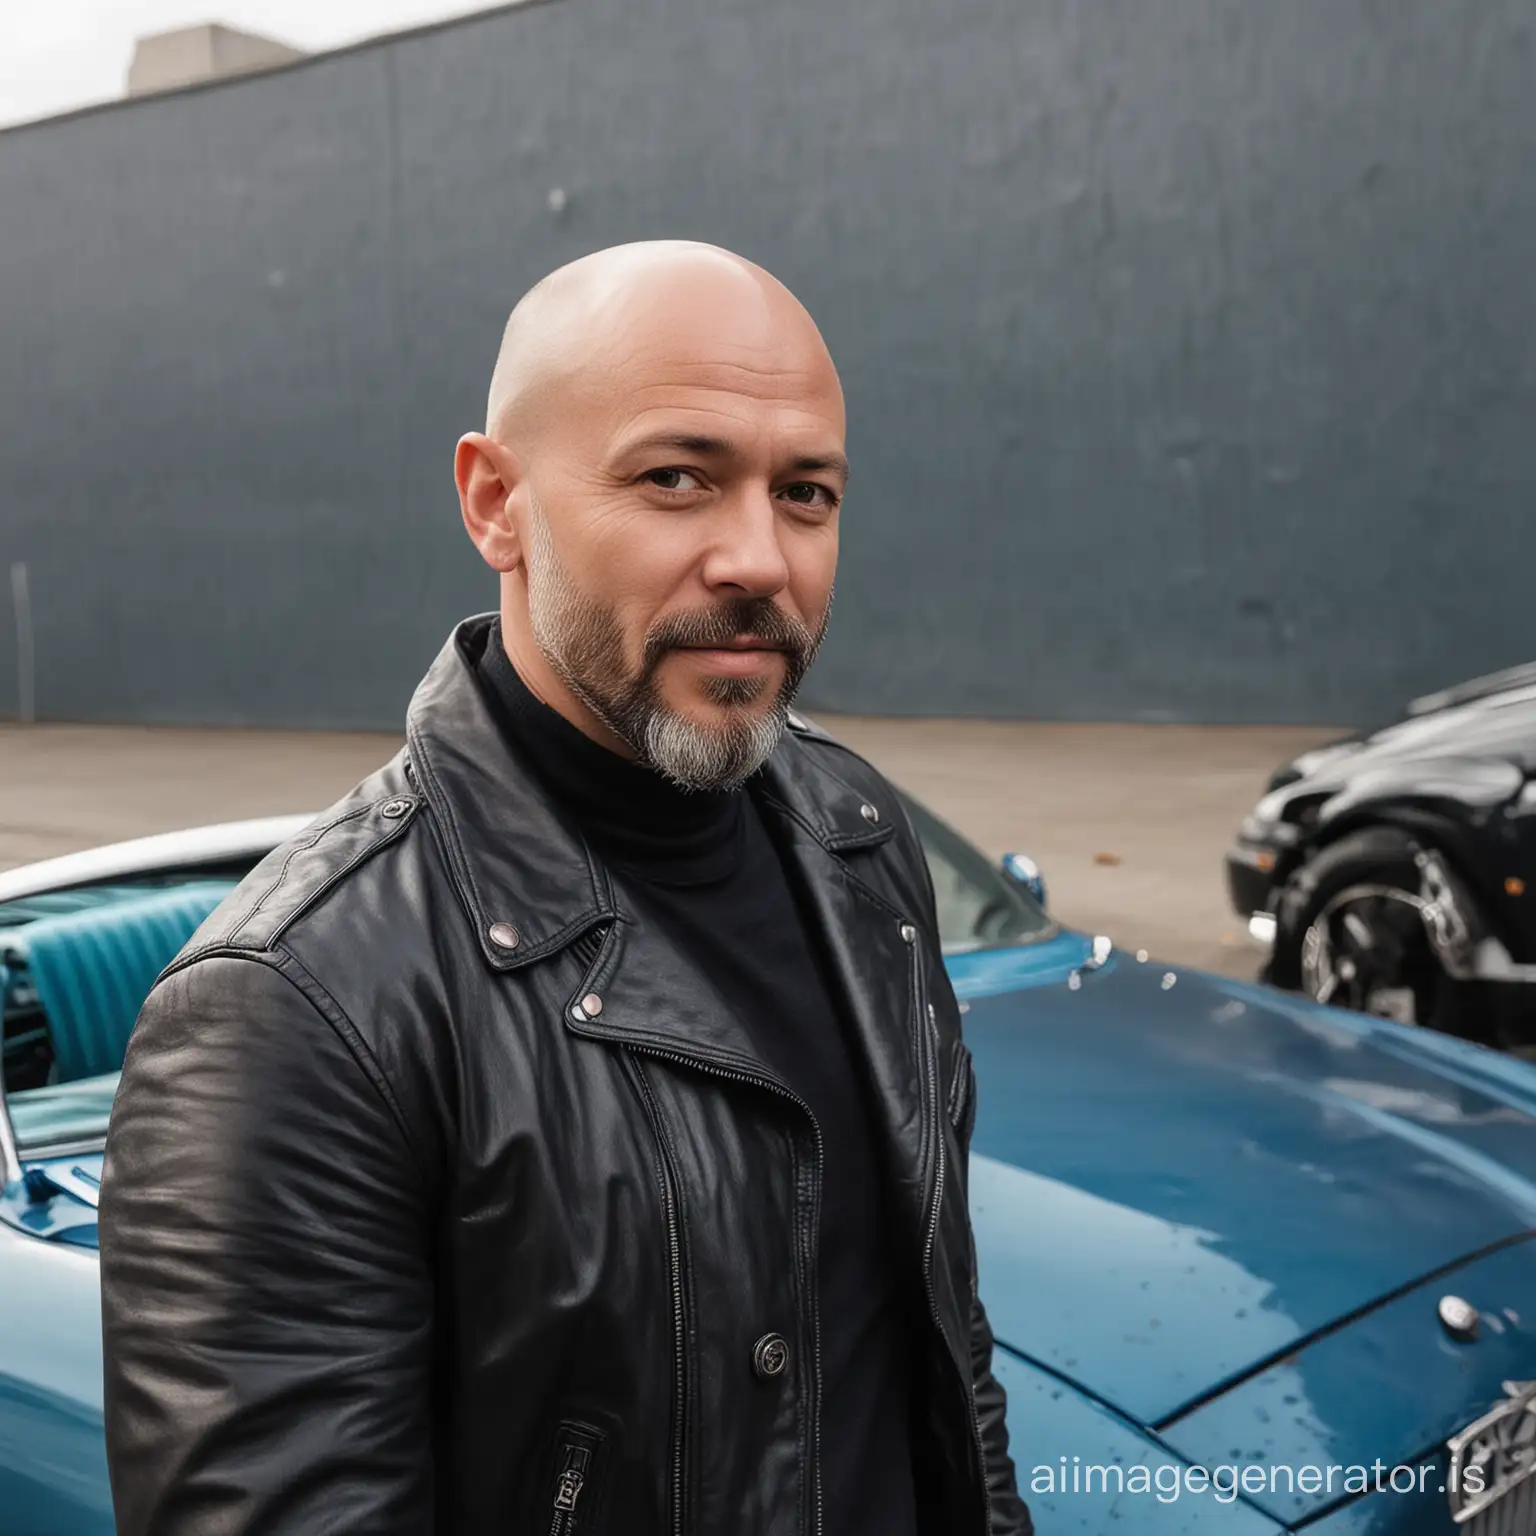 Bald-Man-in-Leather-Jacket-Standing-by-Blue-Car